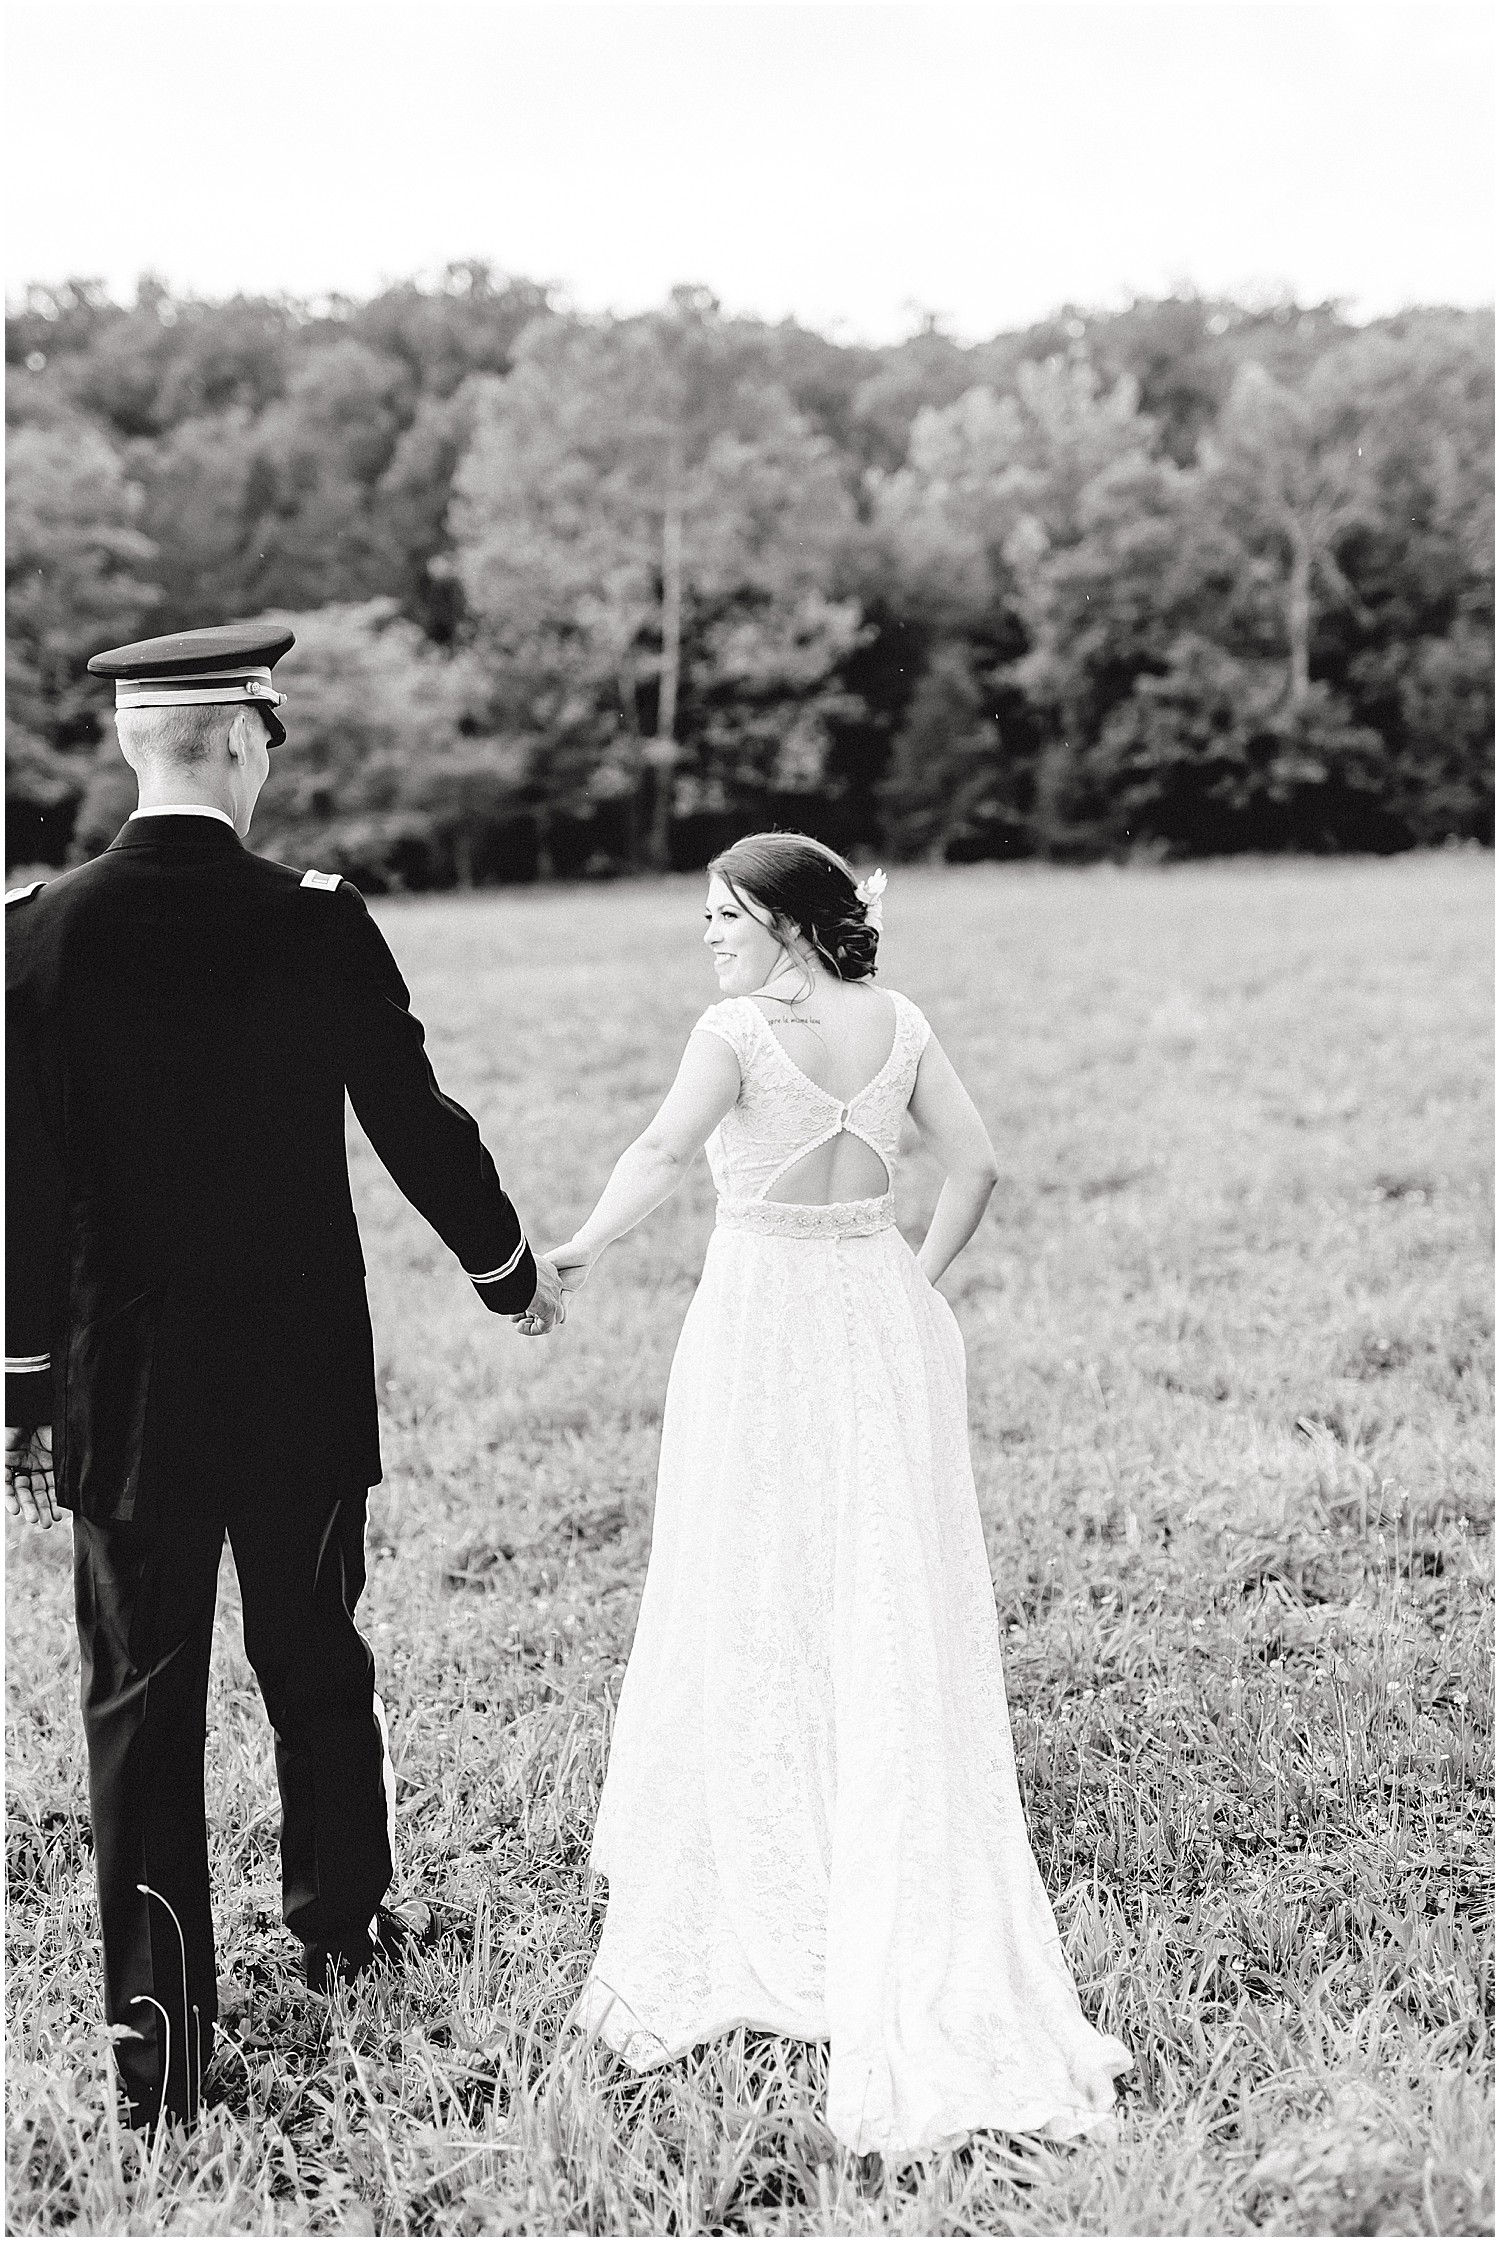 black and white image of bride and groom walking through field on wedding day